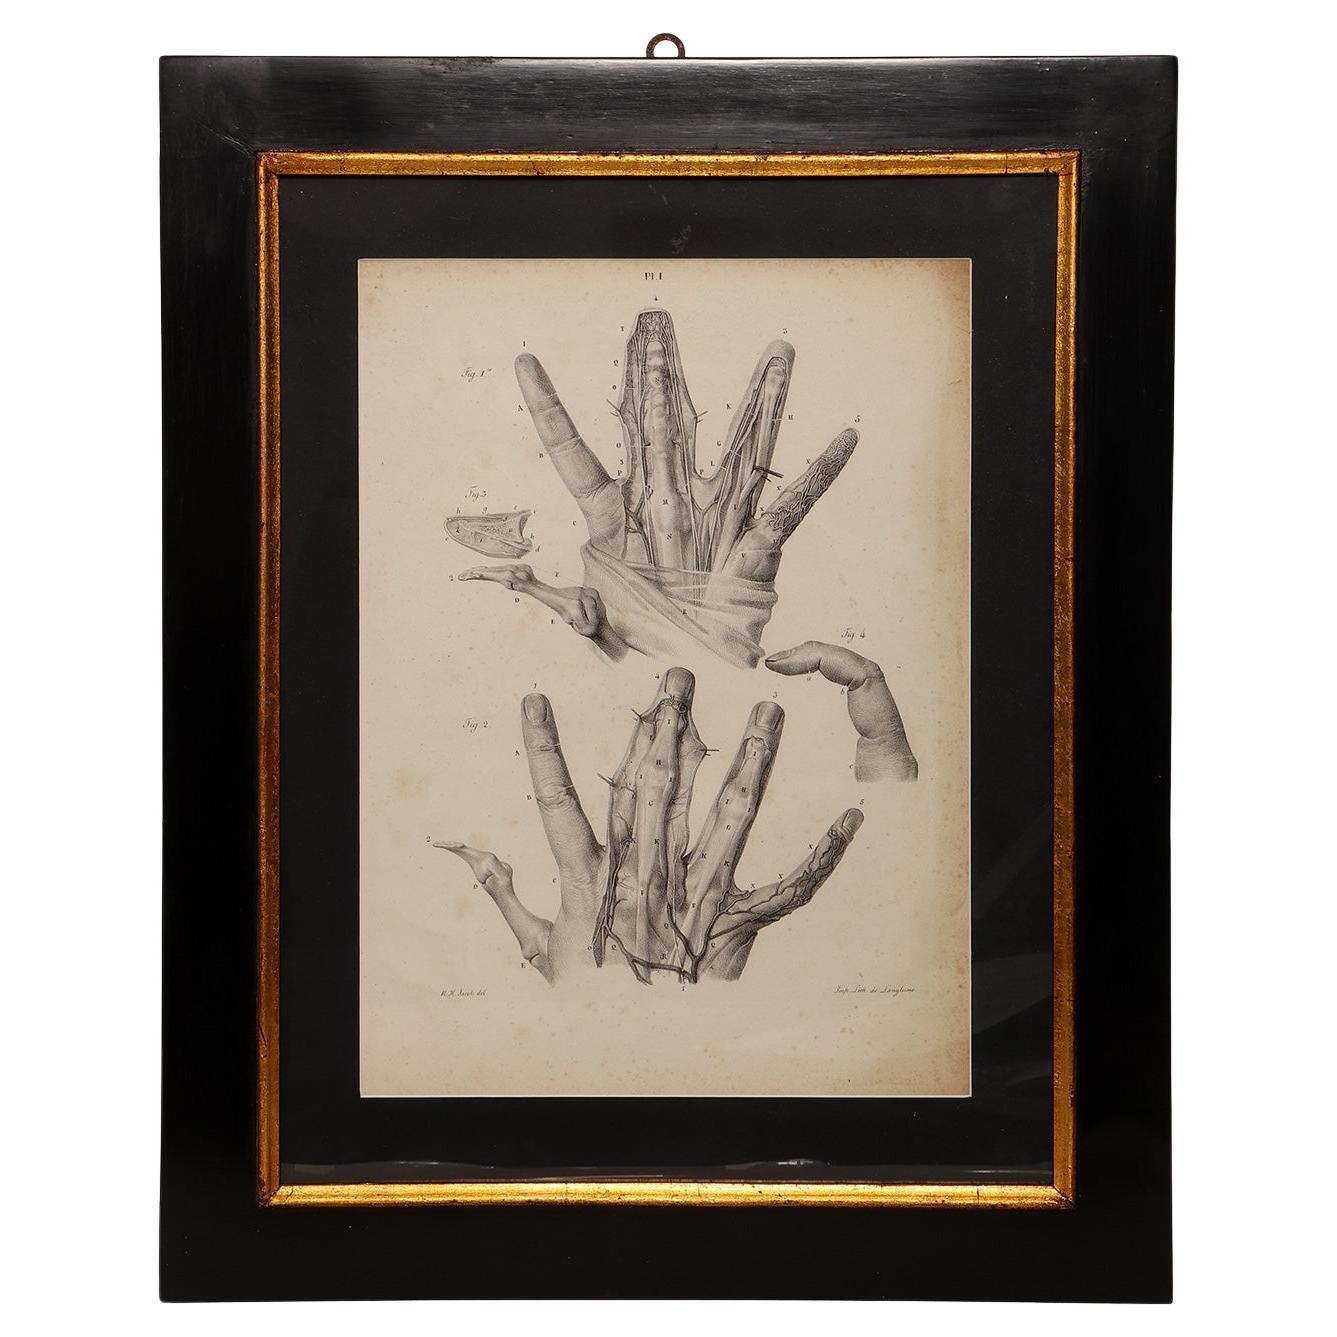 Lithographic print on paper, depicting the atlas of the hand, France 1850 ca. For Sale